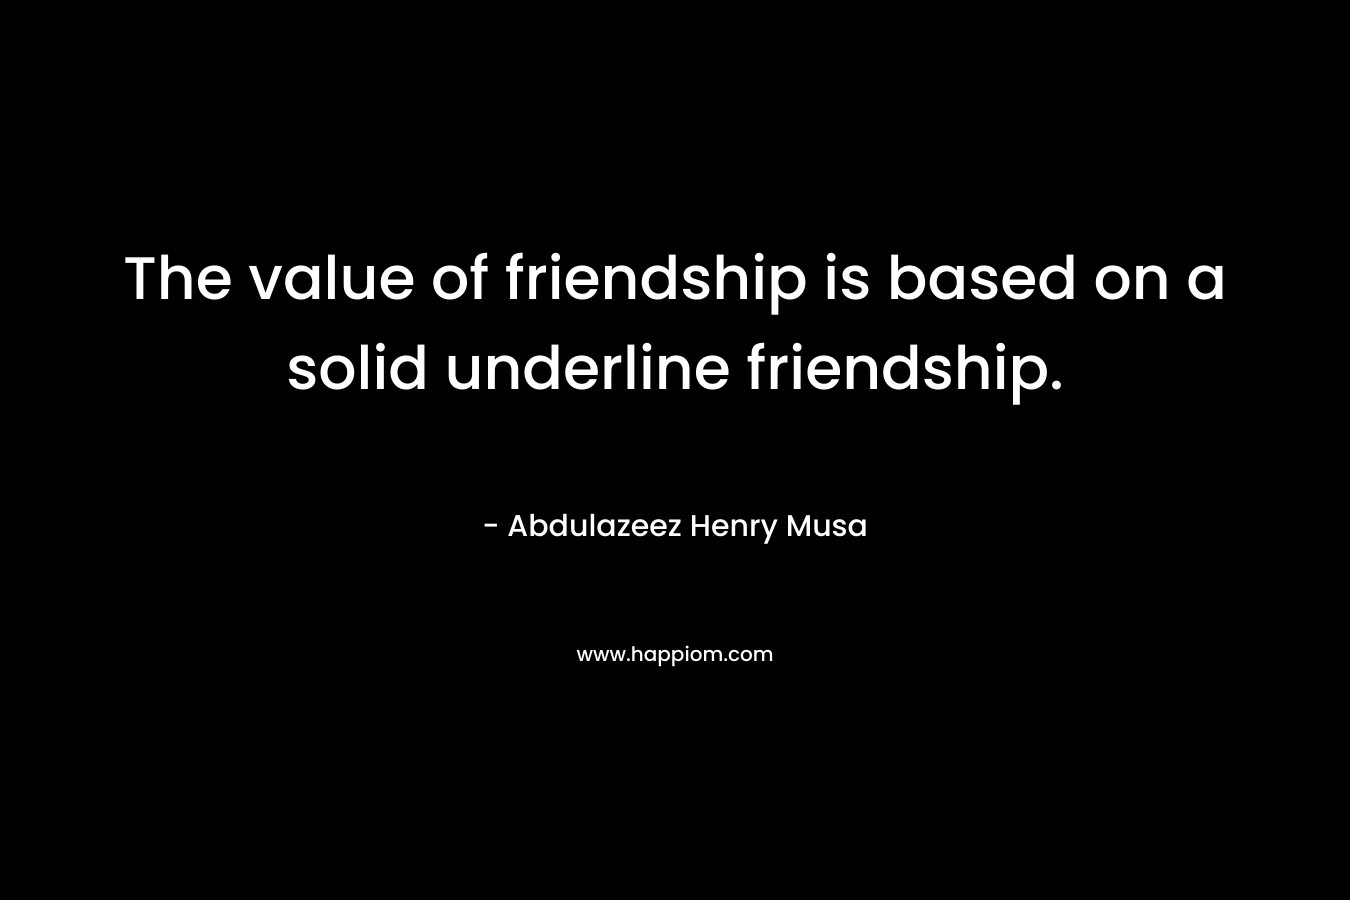 The value of friendship is based on a solid underline friendship.